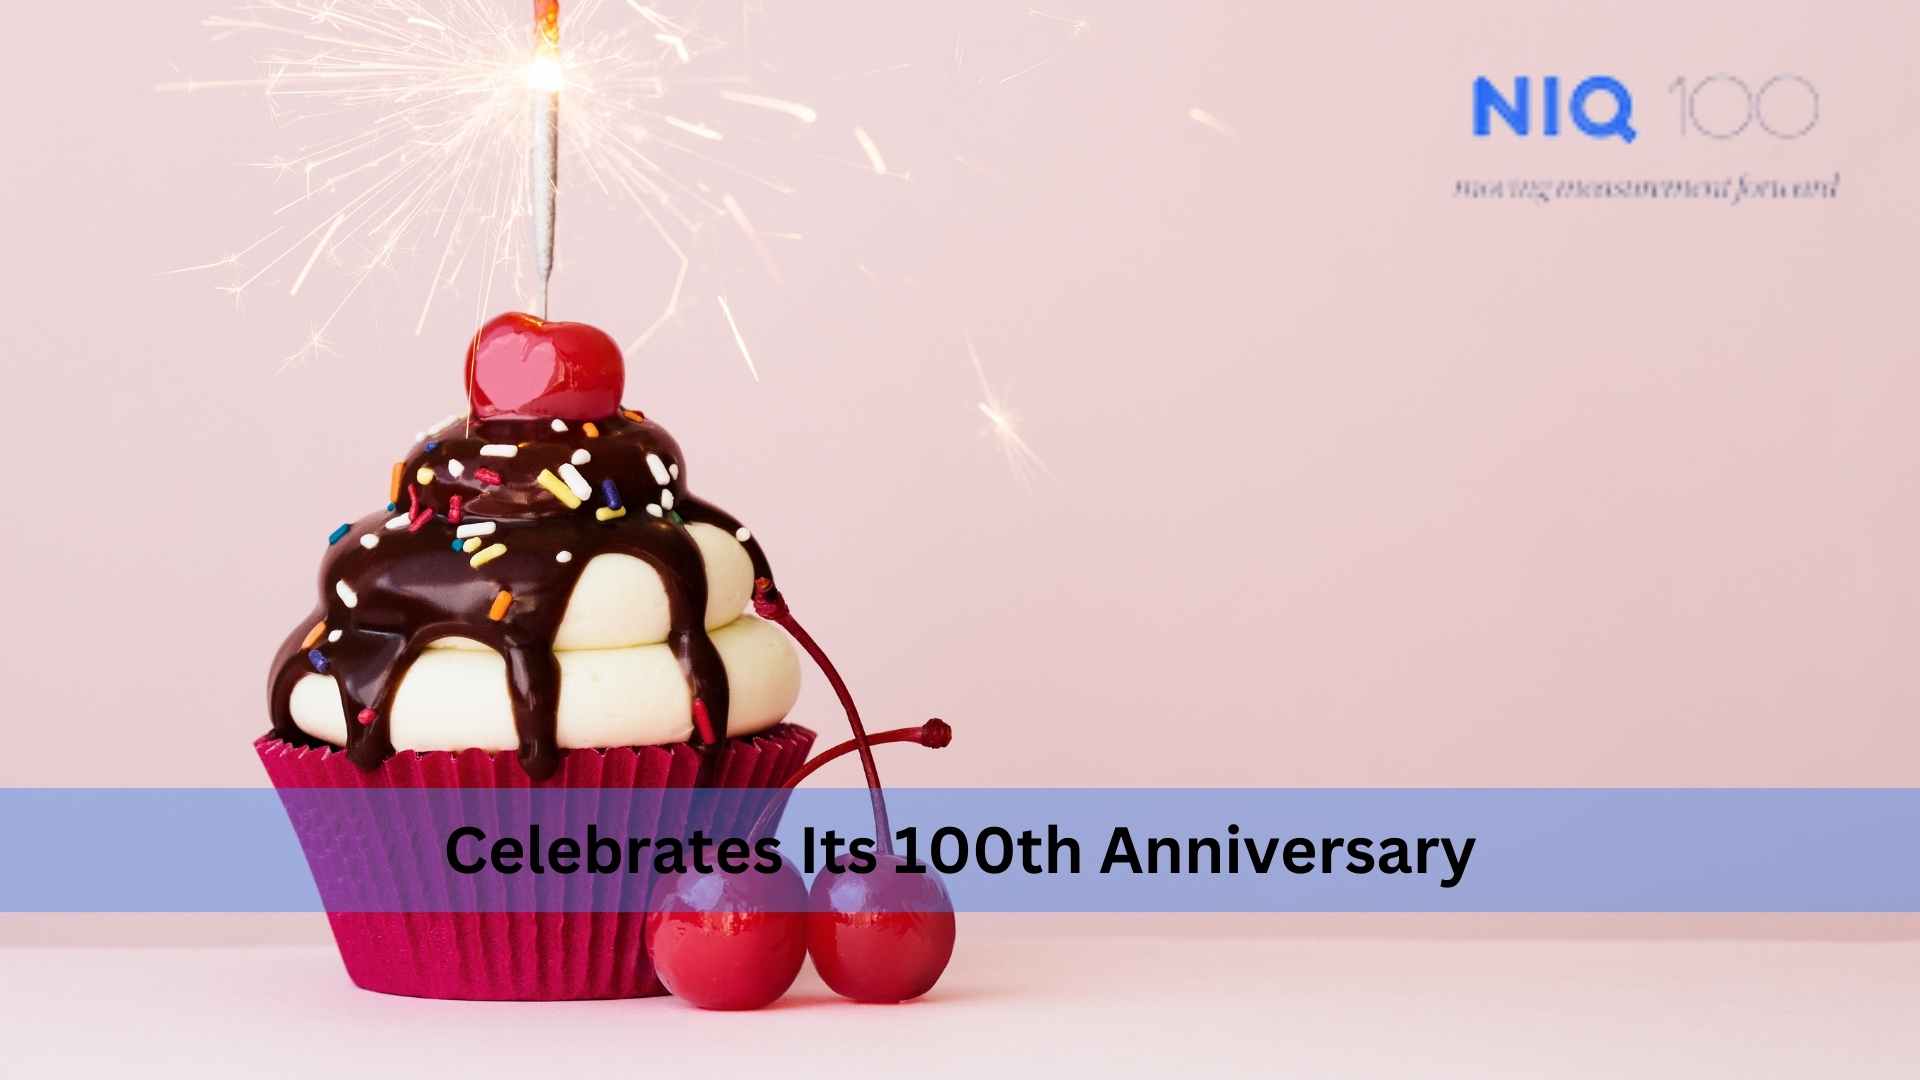 NIQ Celebrates 100 Years of Empowering Companies with Forward-Looking Buyer Insights